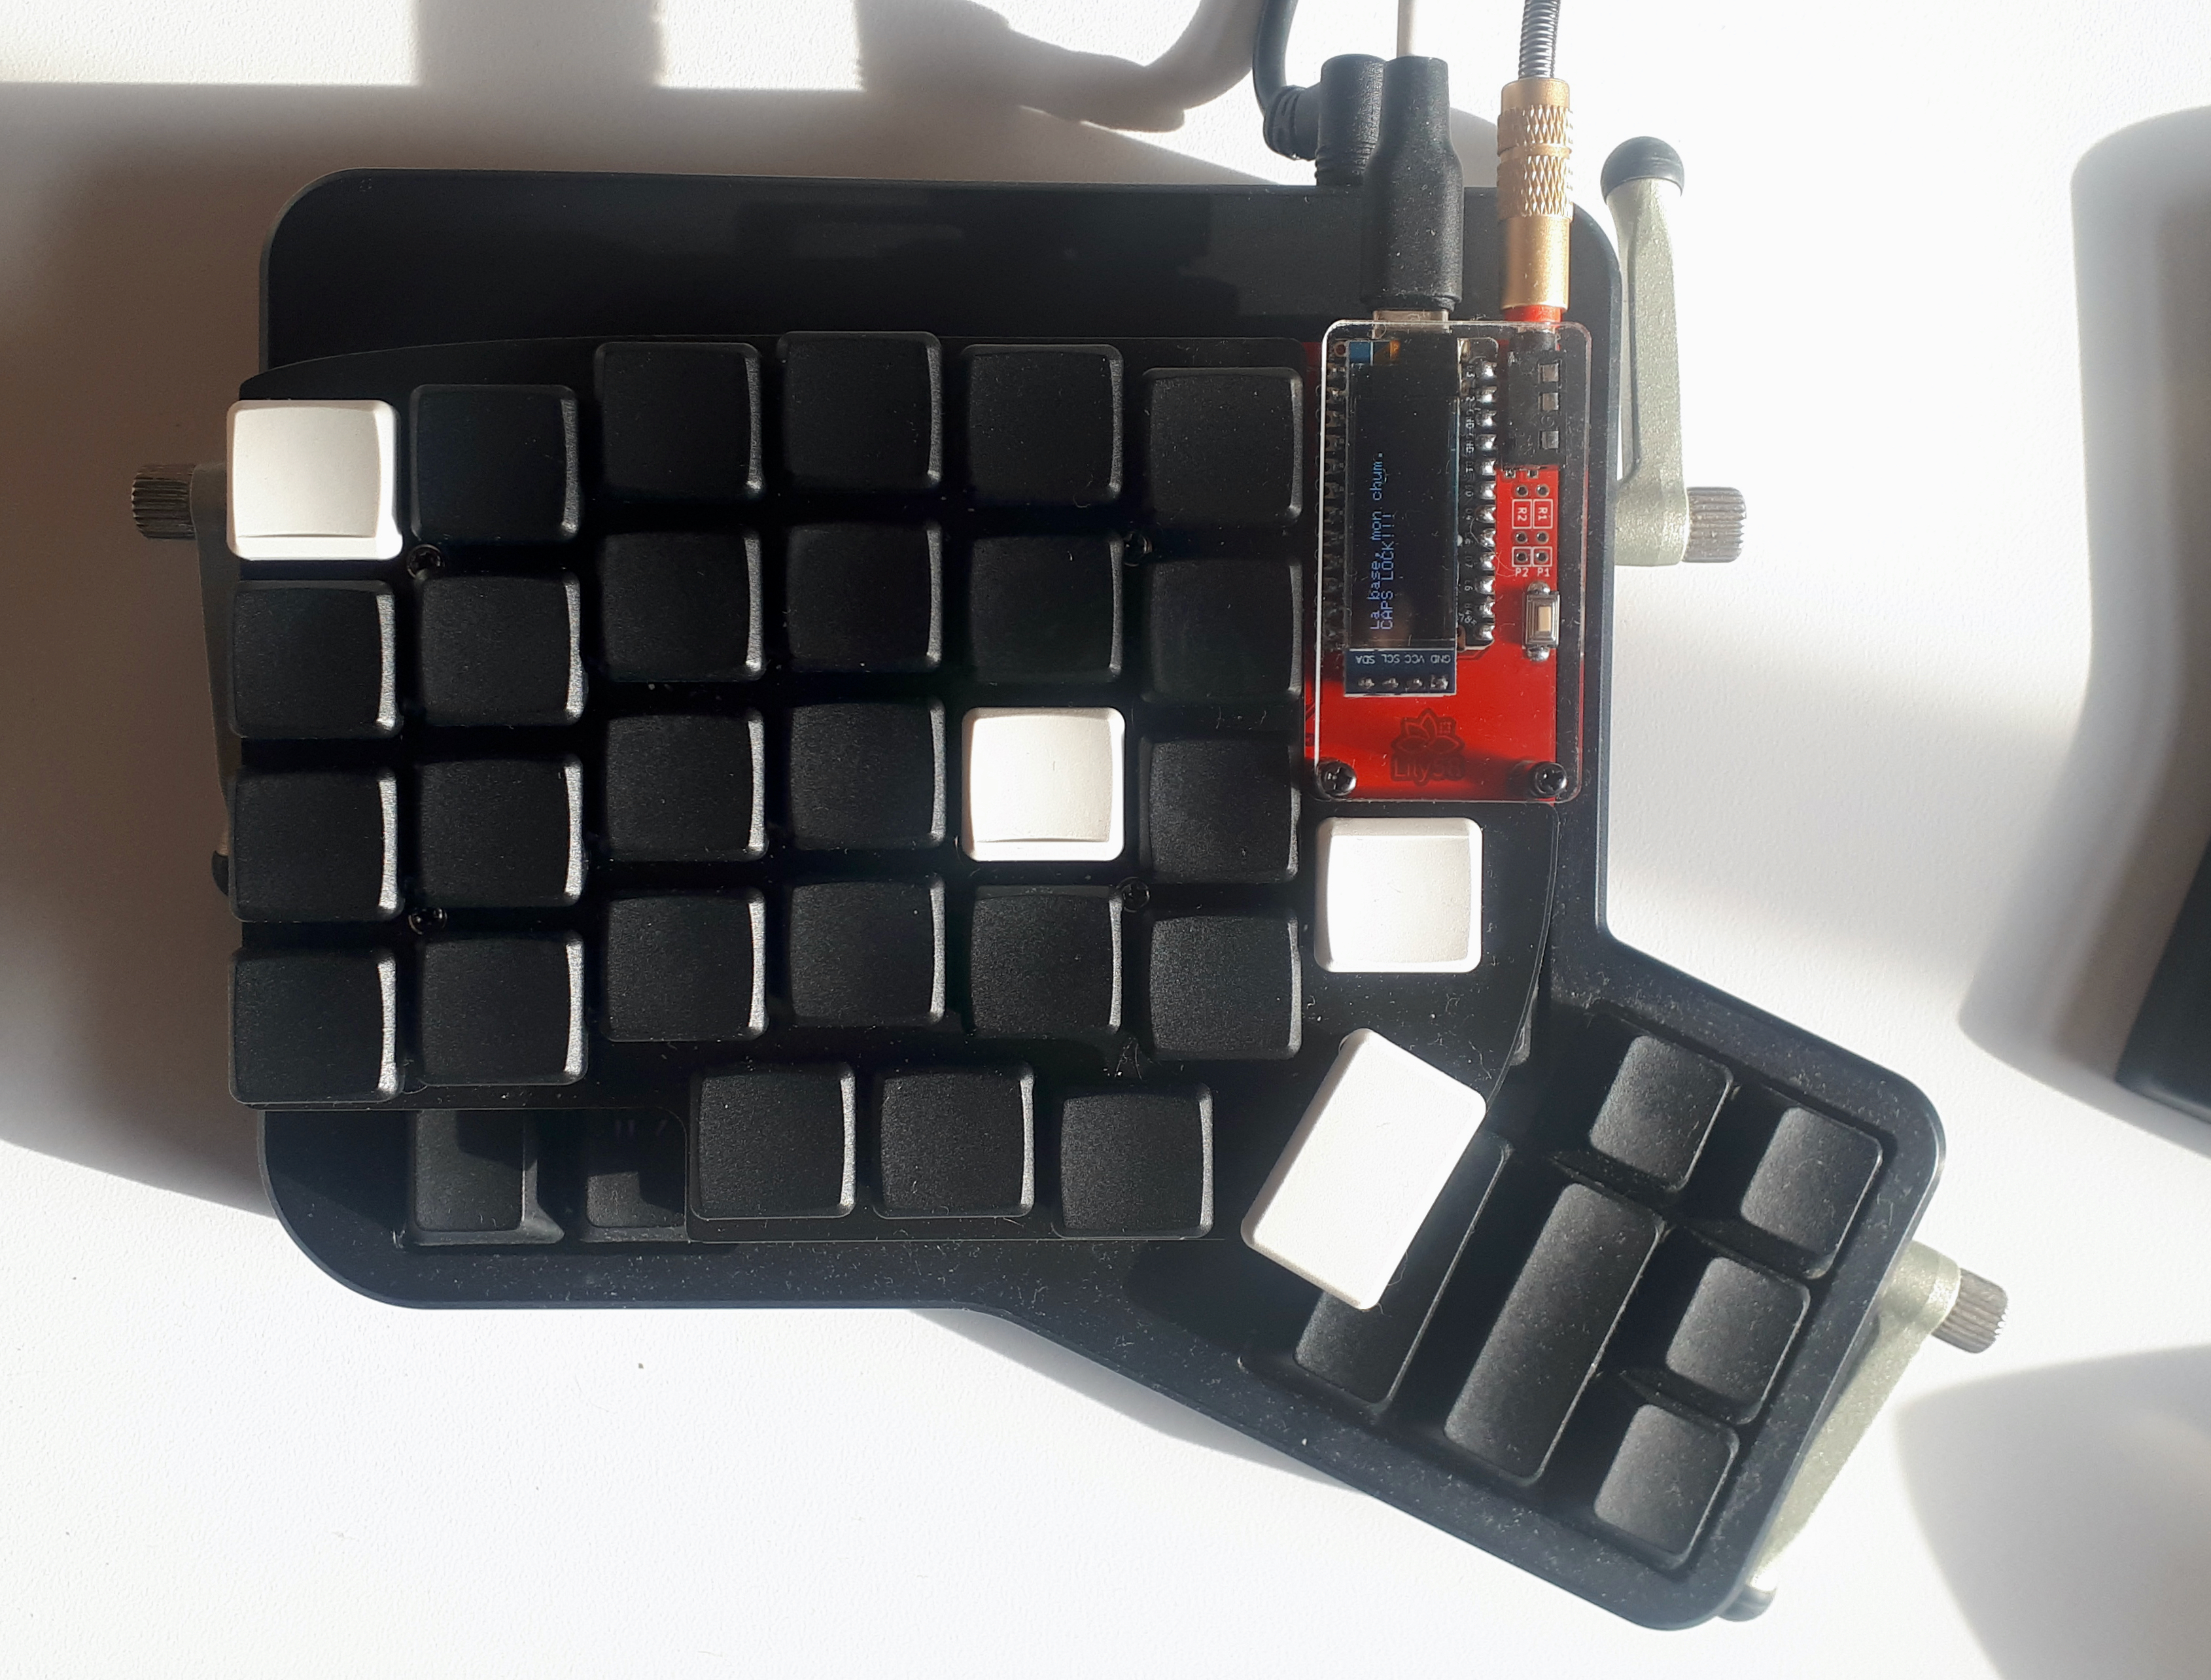 Lily58 on top of an Ergodox. Lily58 is smaller.